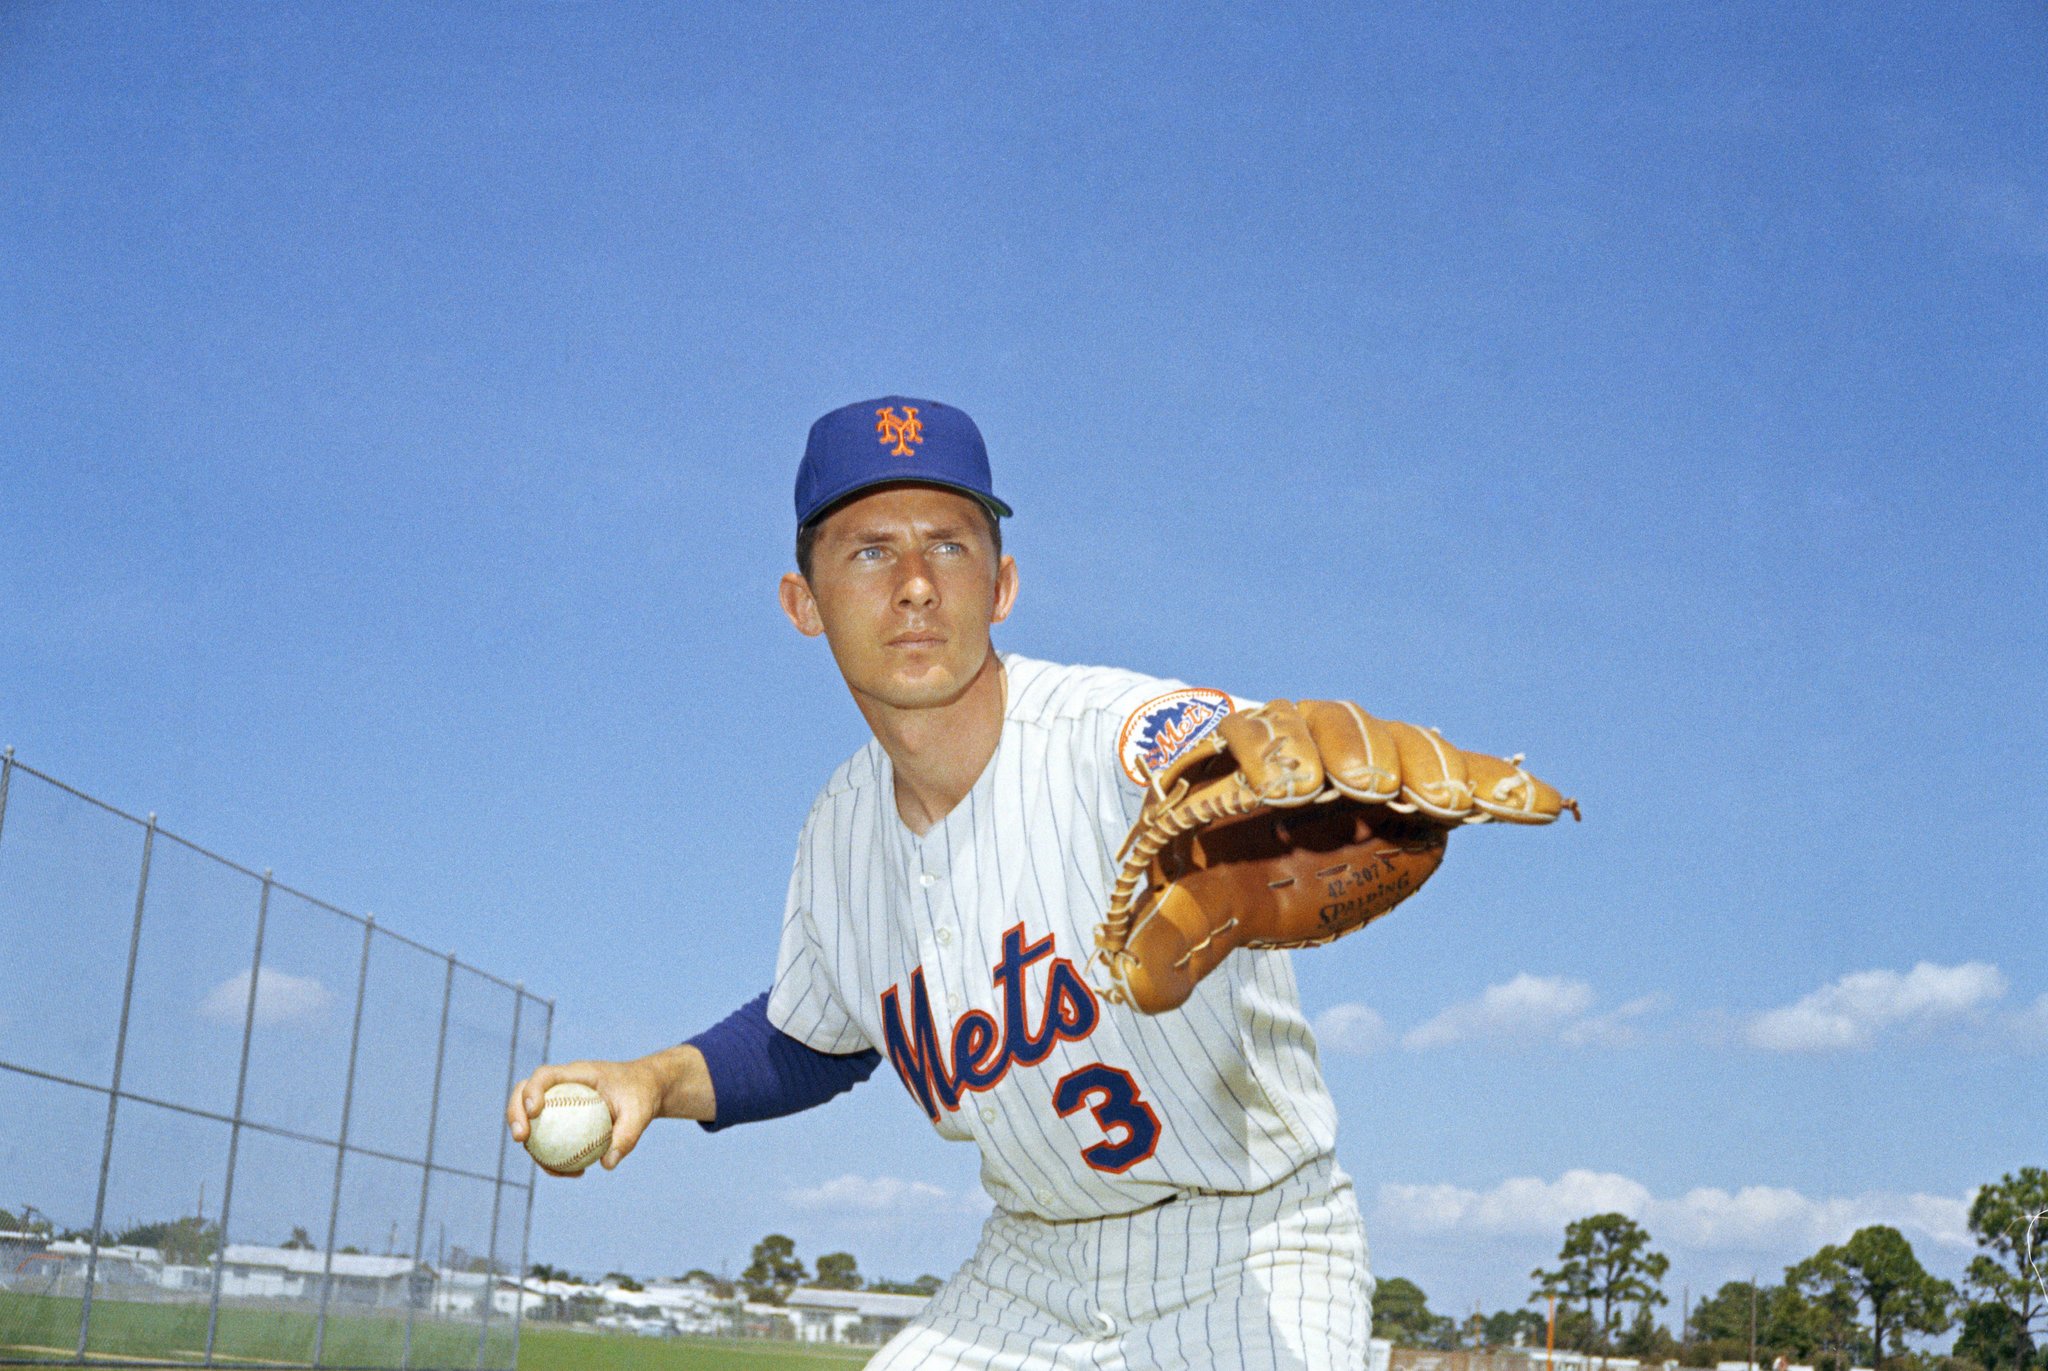 A happy 77th birthday to the only man in uniform for both Mets championships, Bud Harrelson! 